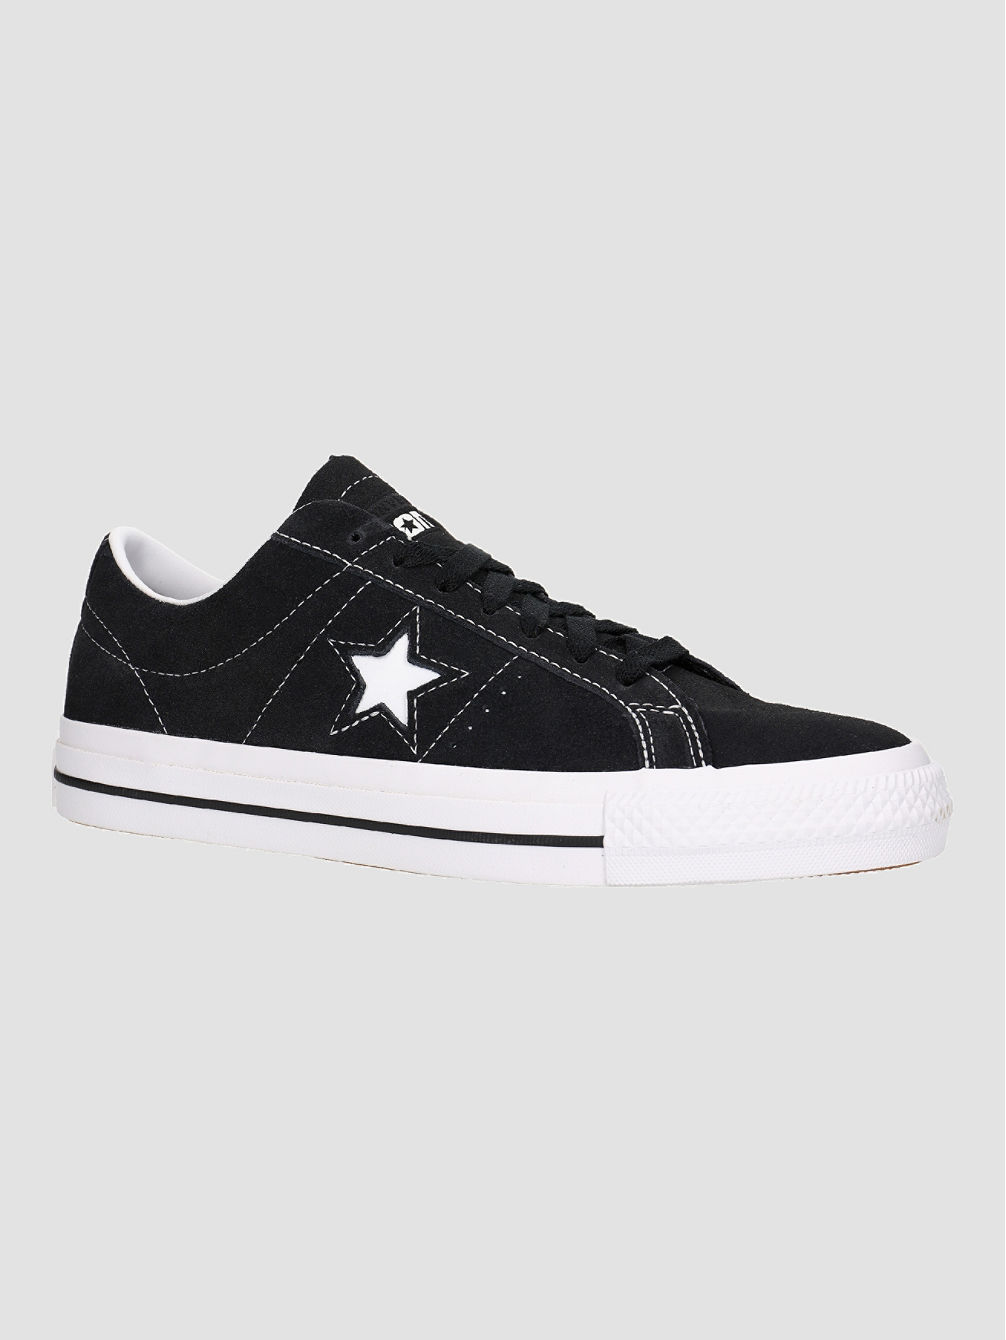 One Star Pro Chaussures de Skate